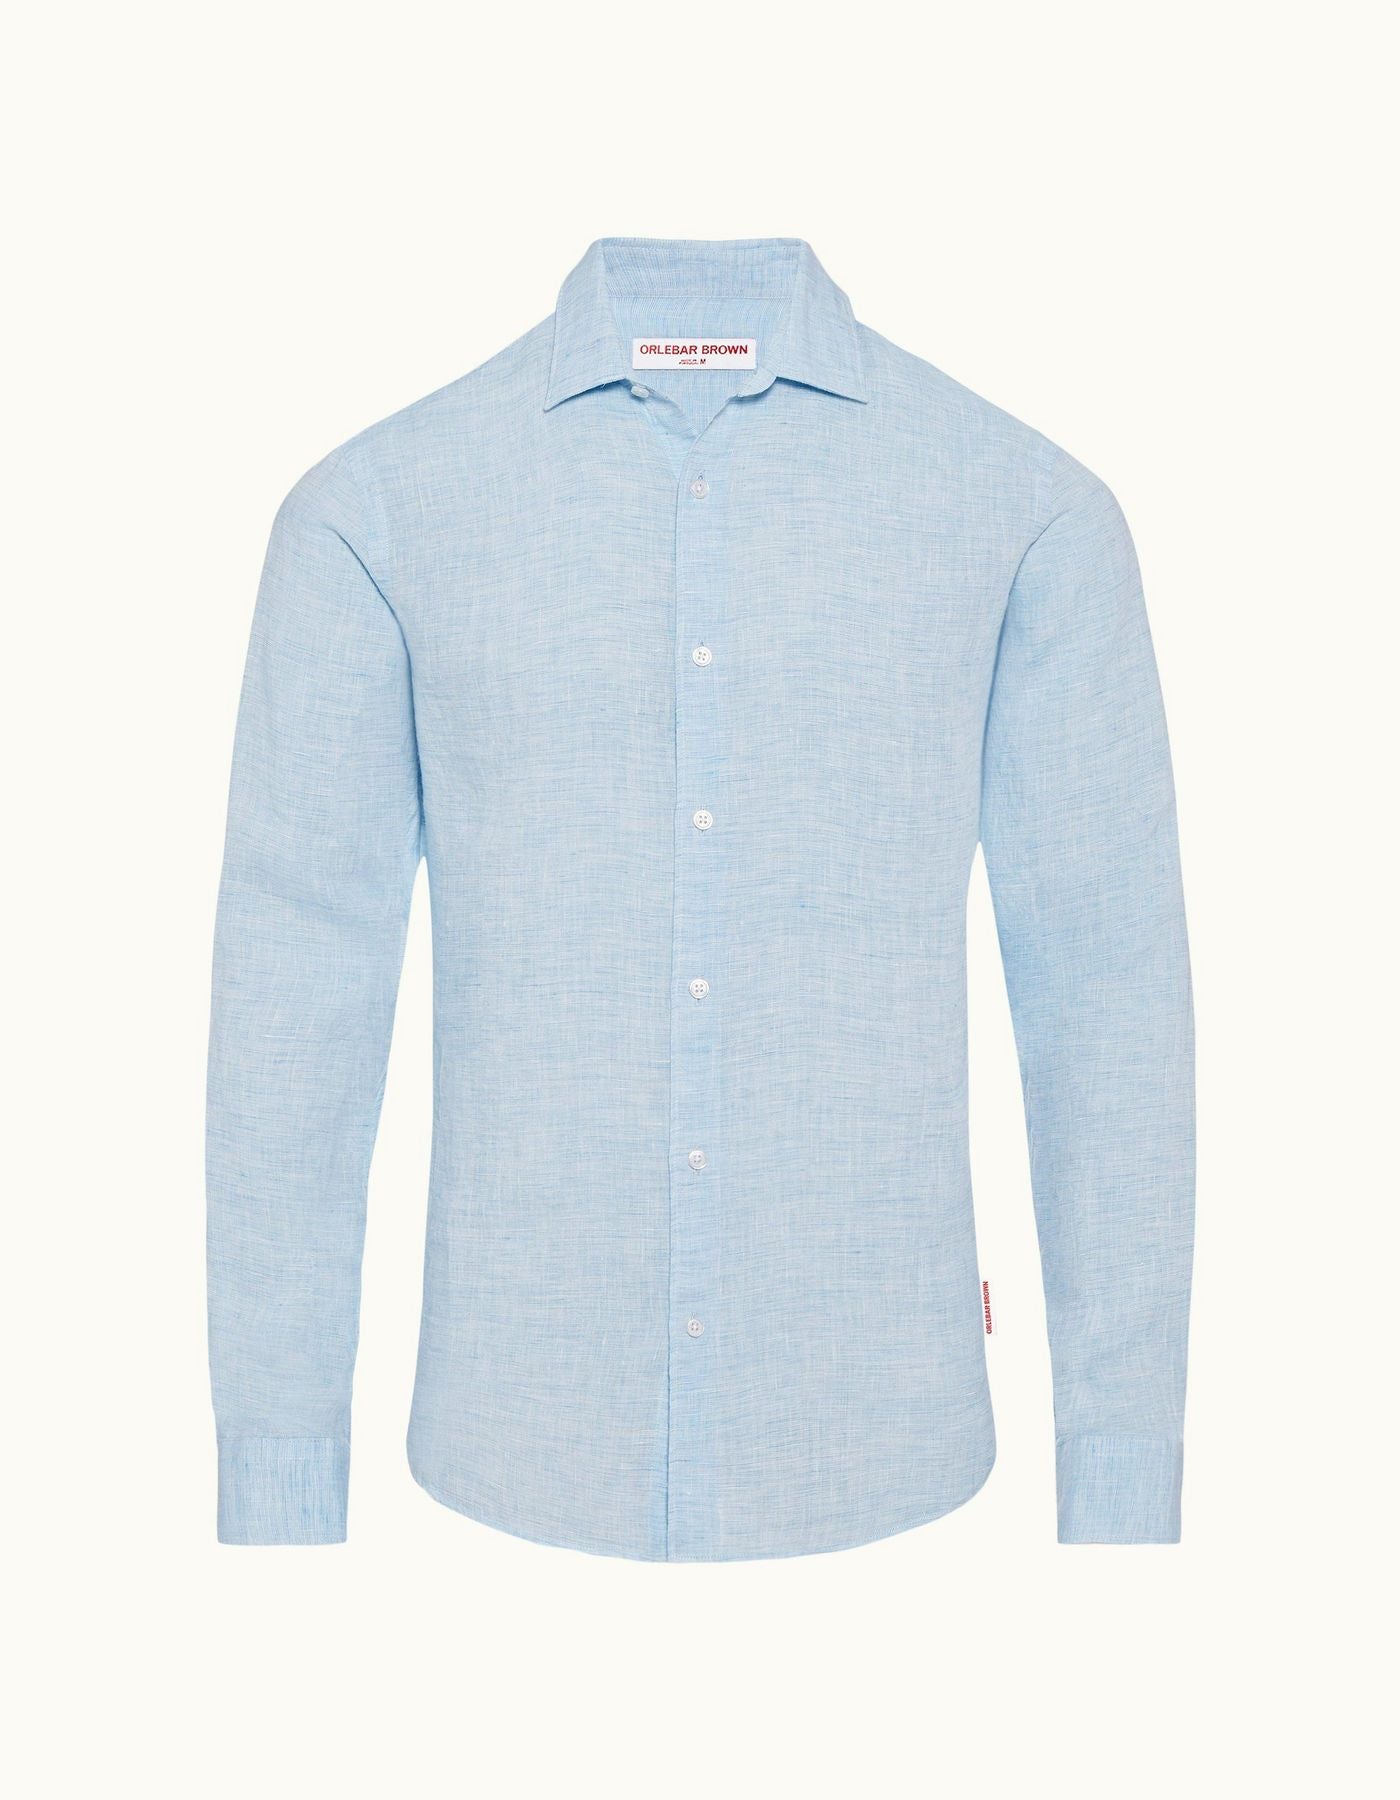 Giles Linen Shirt in Pale Blue & White